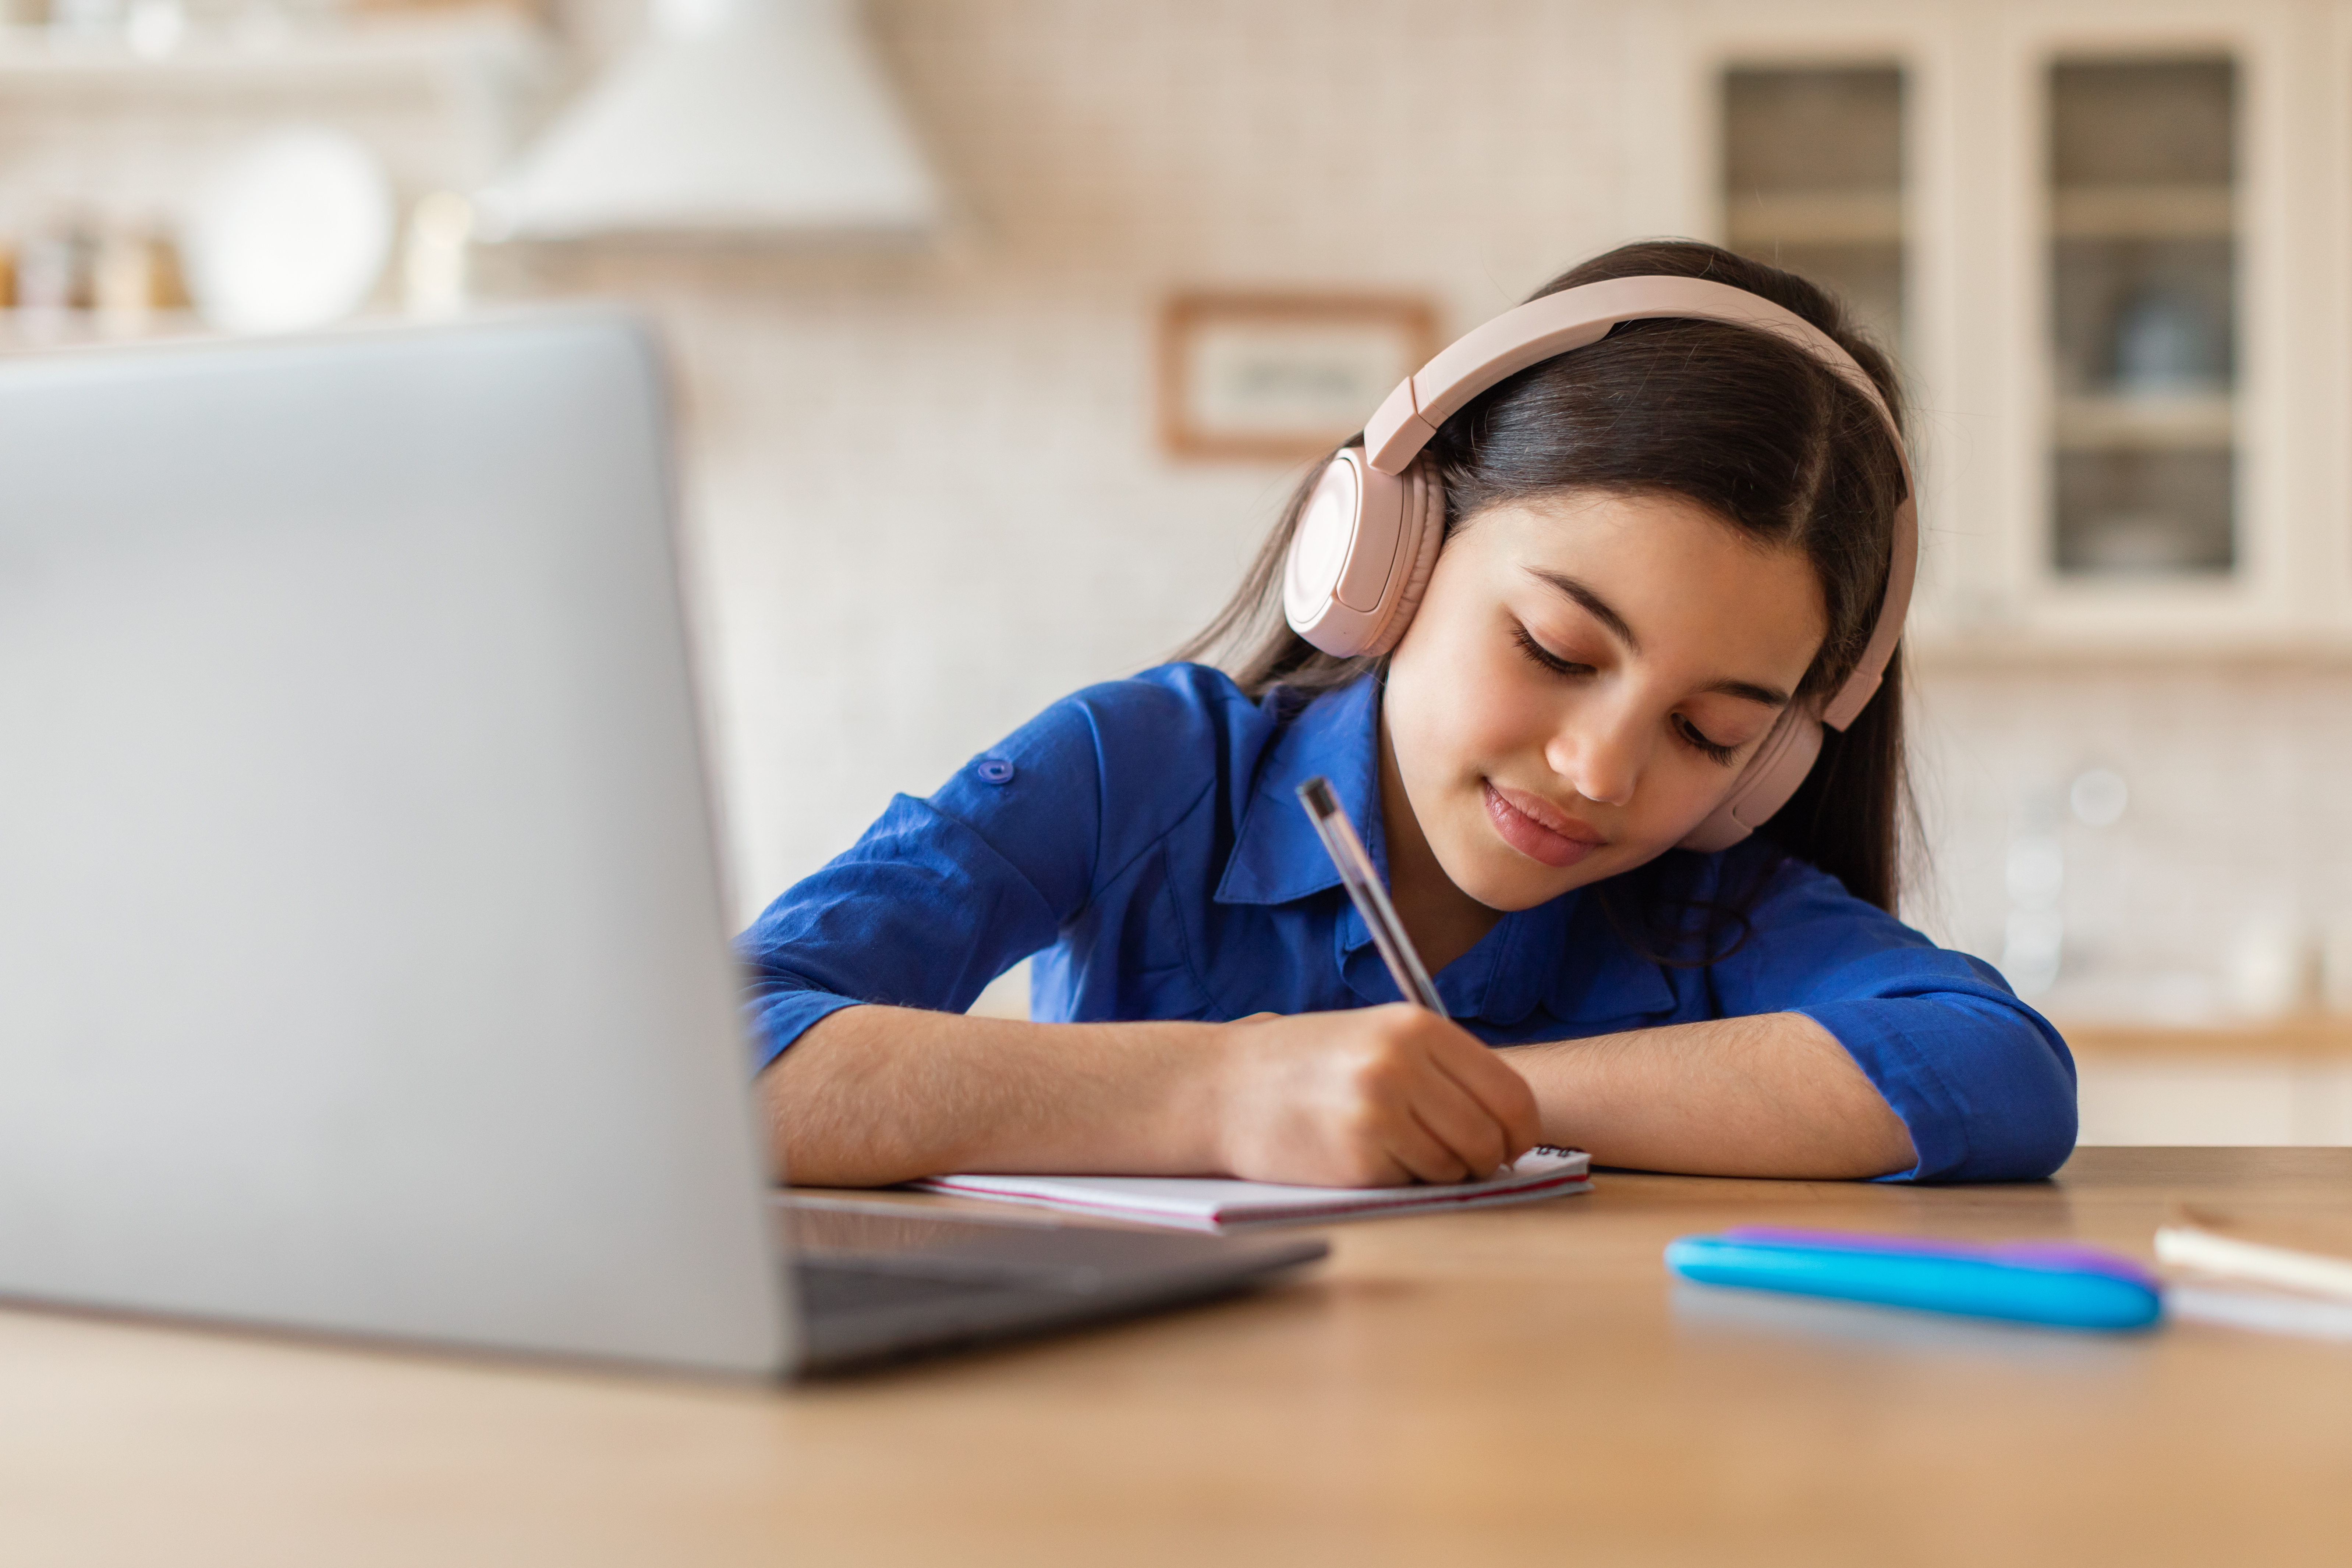 Middle schooler wearing headphones and doing work in front of her laptop at a desk